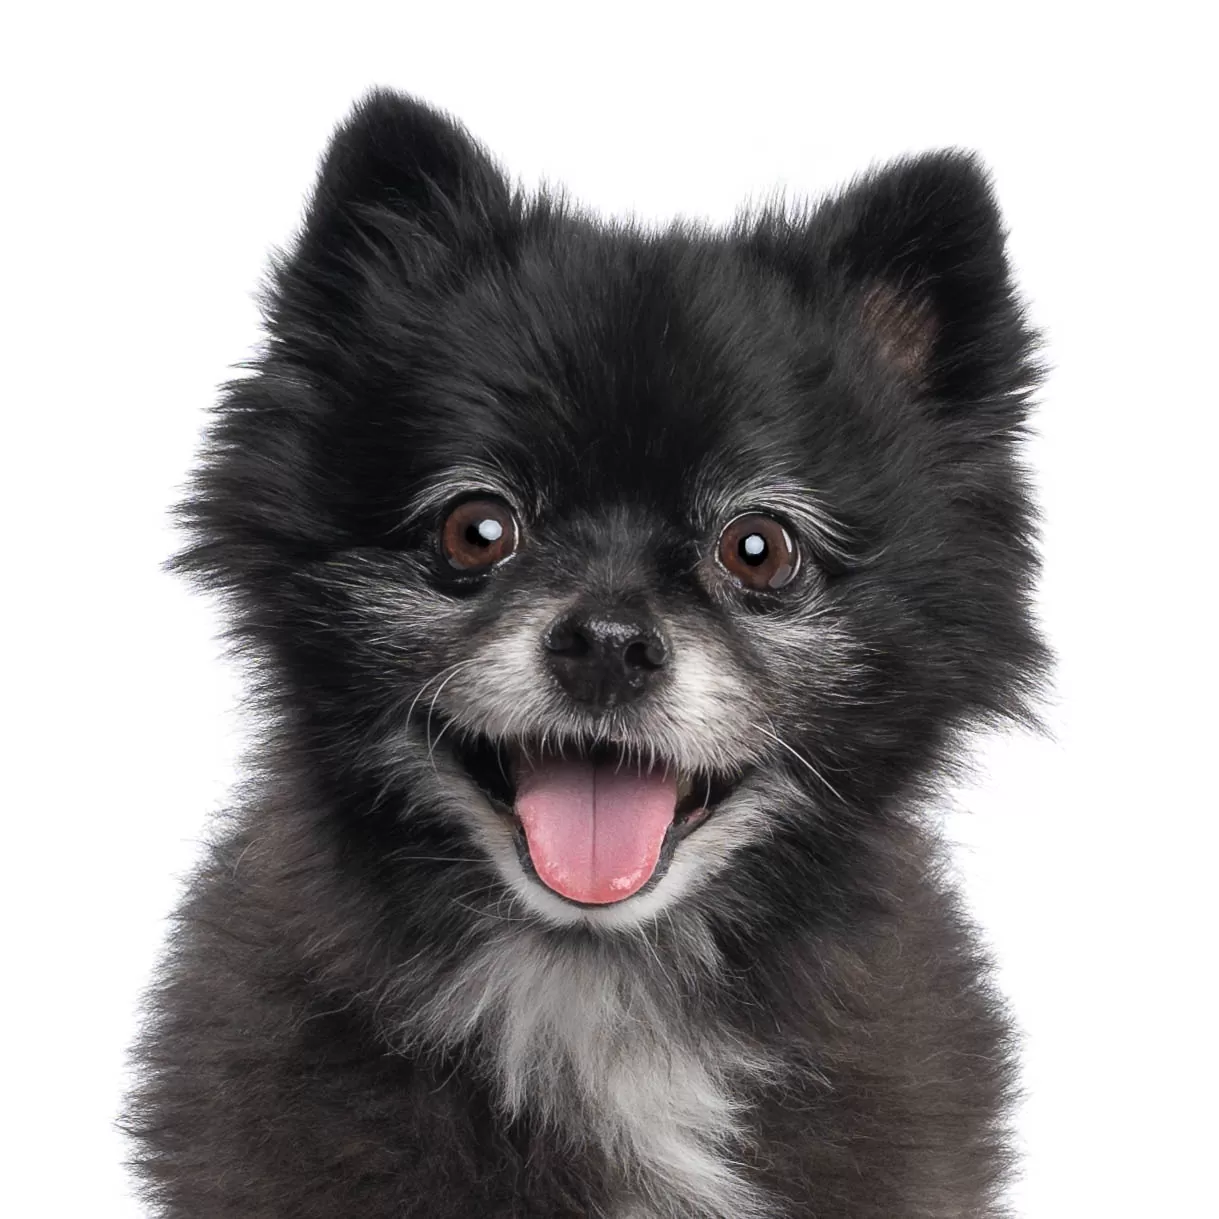 Black pomeranian dog smiling at the camera on a white background. Photographed in studio by Heidi Grace Pet Photography in Calgary, Alberta